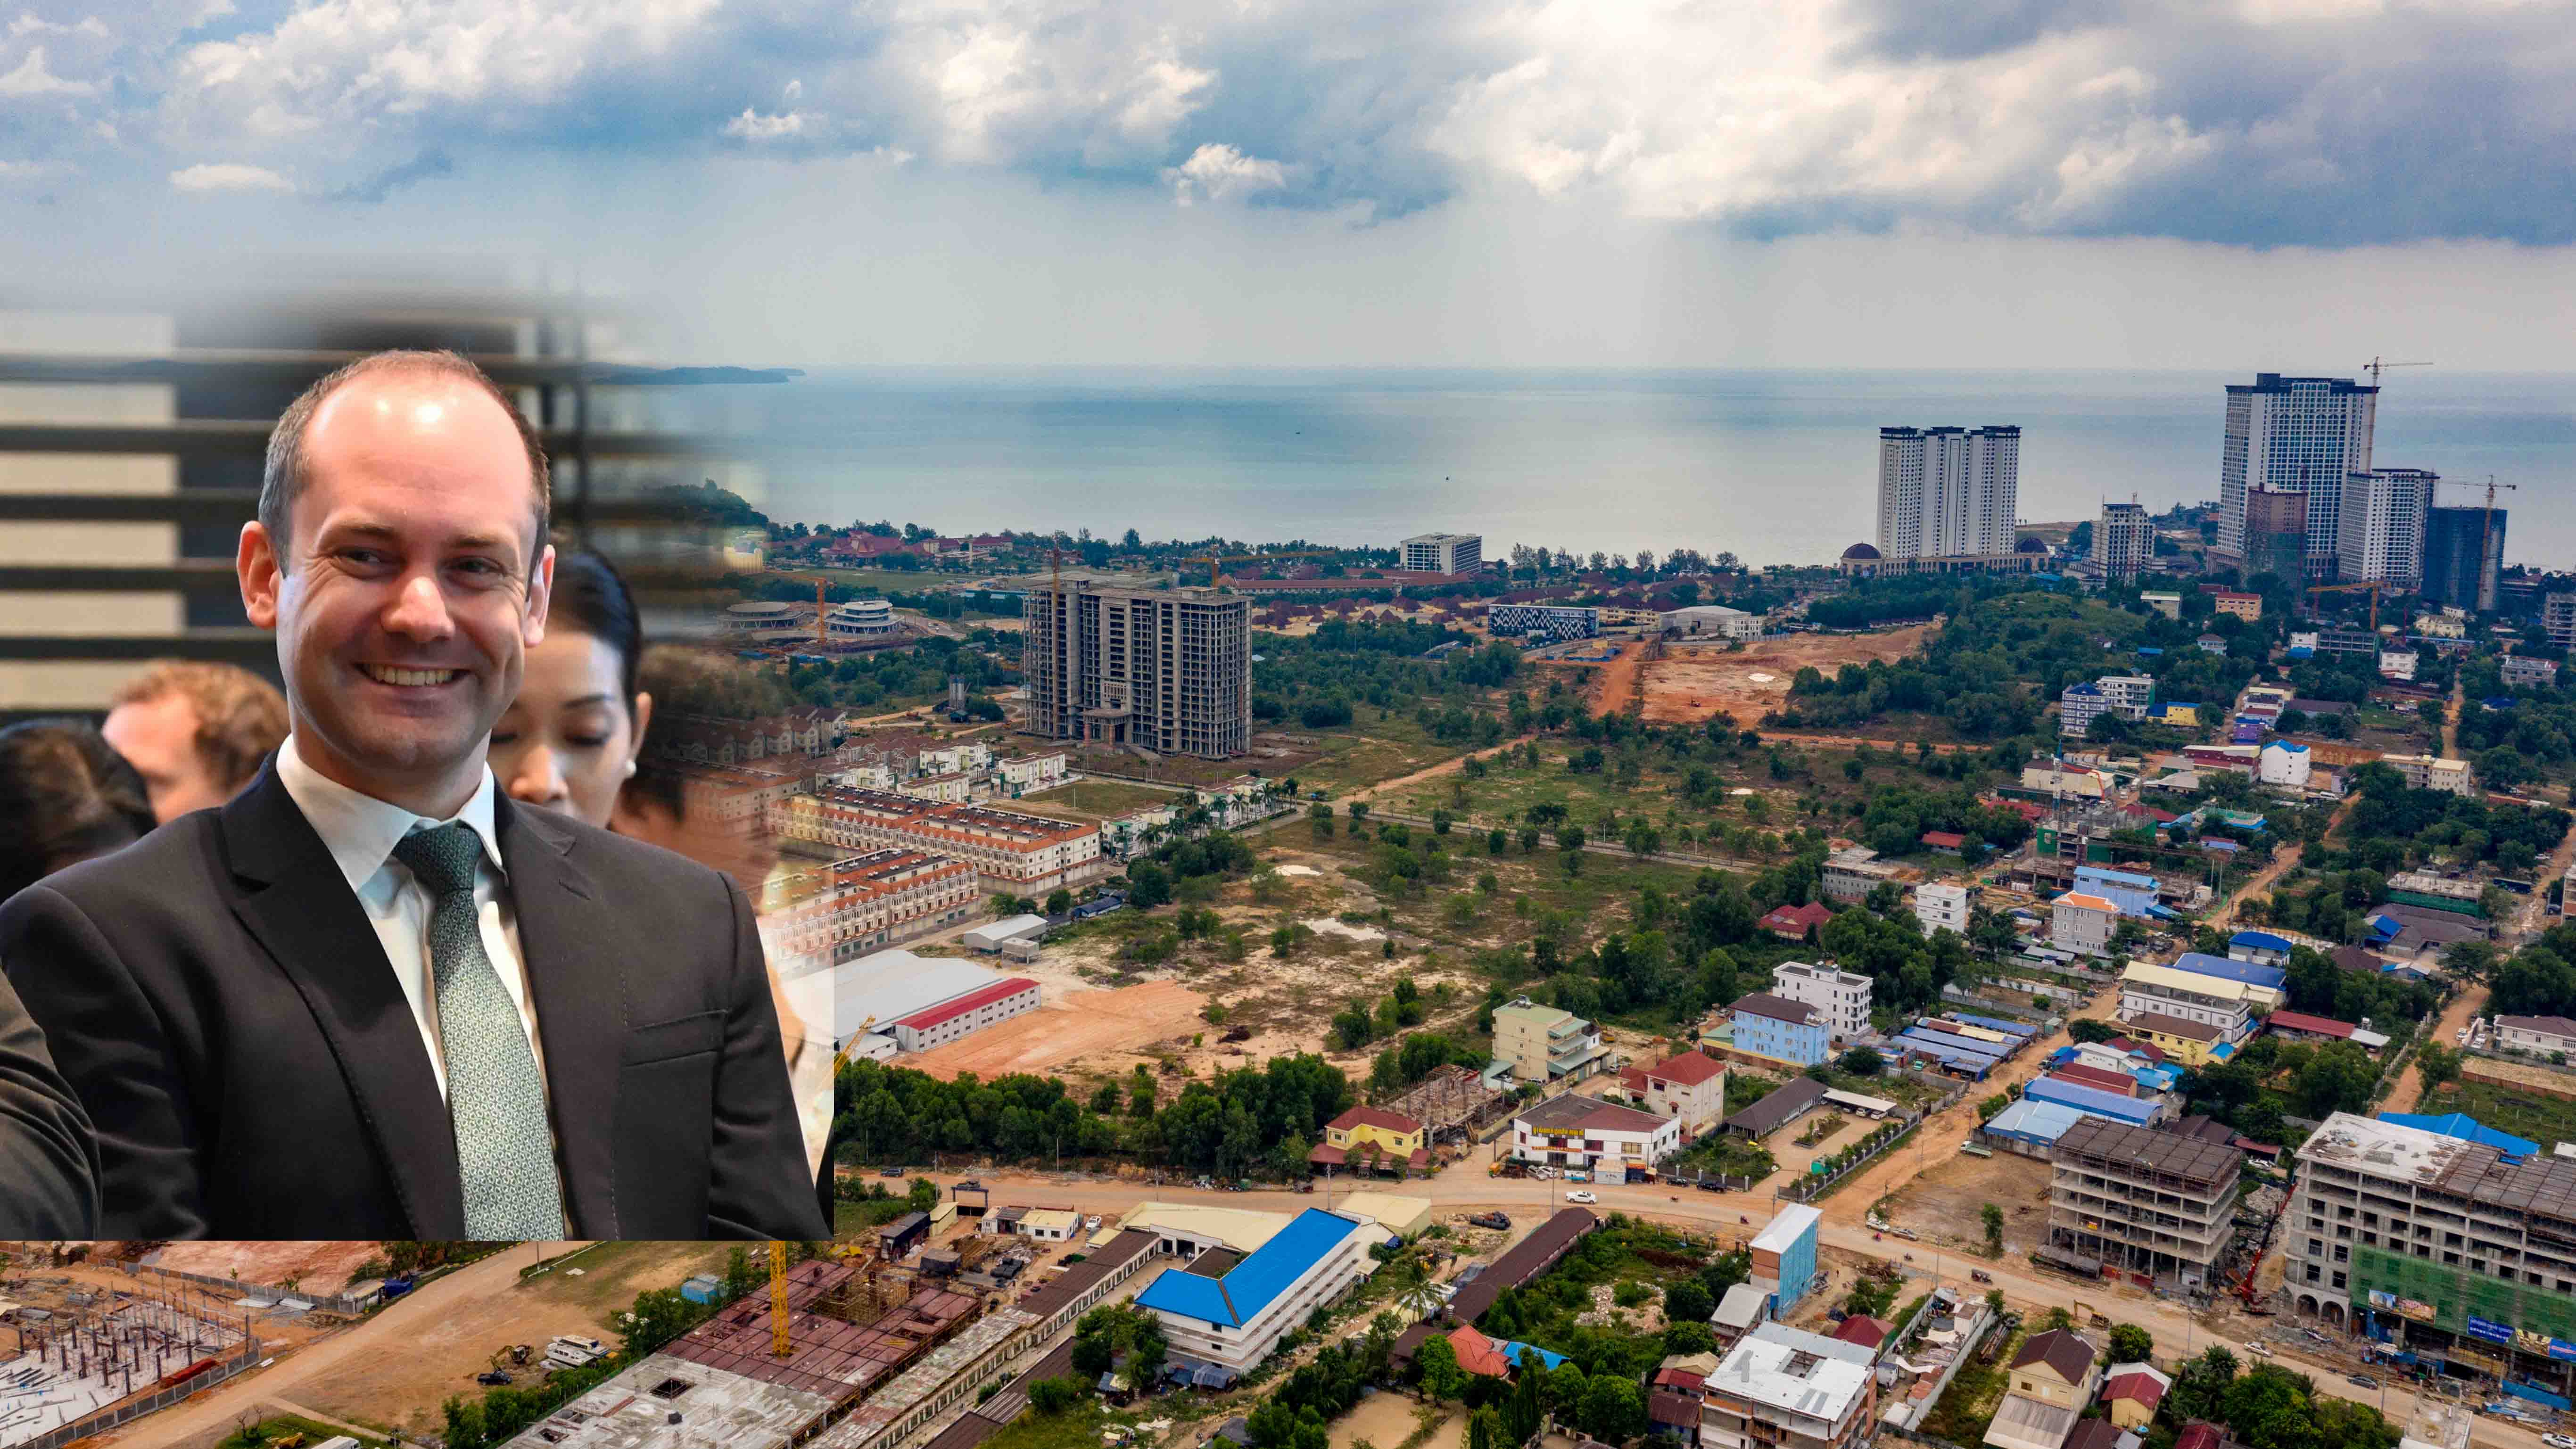 Ban on online gambling shrinks real estate activities in Sihanouvkille, but opportunity arises